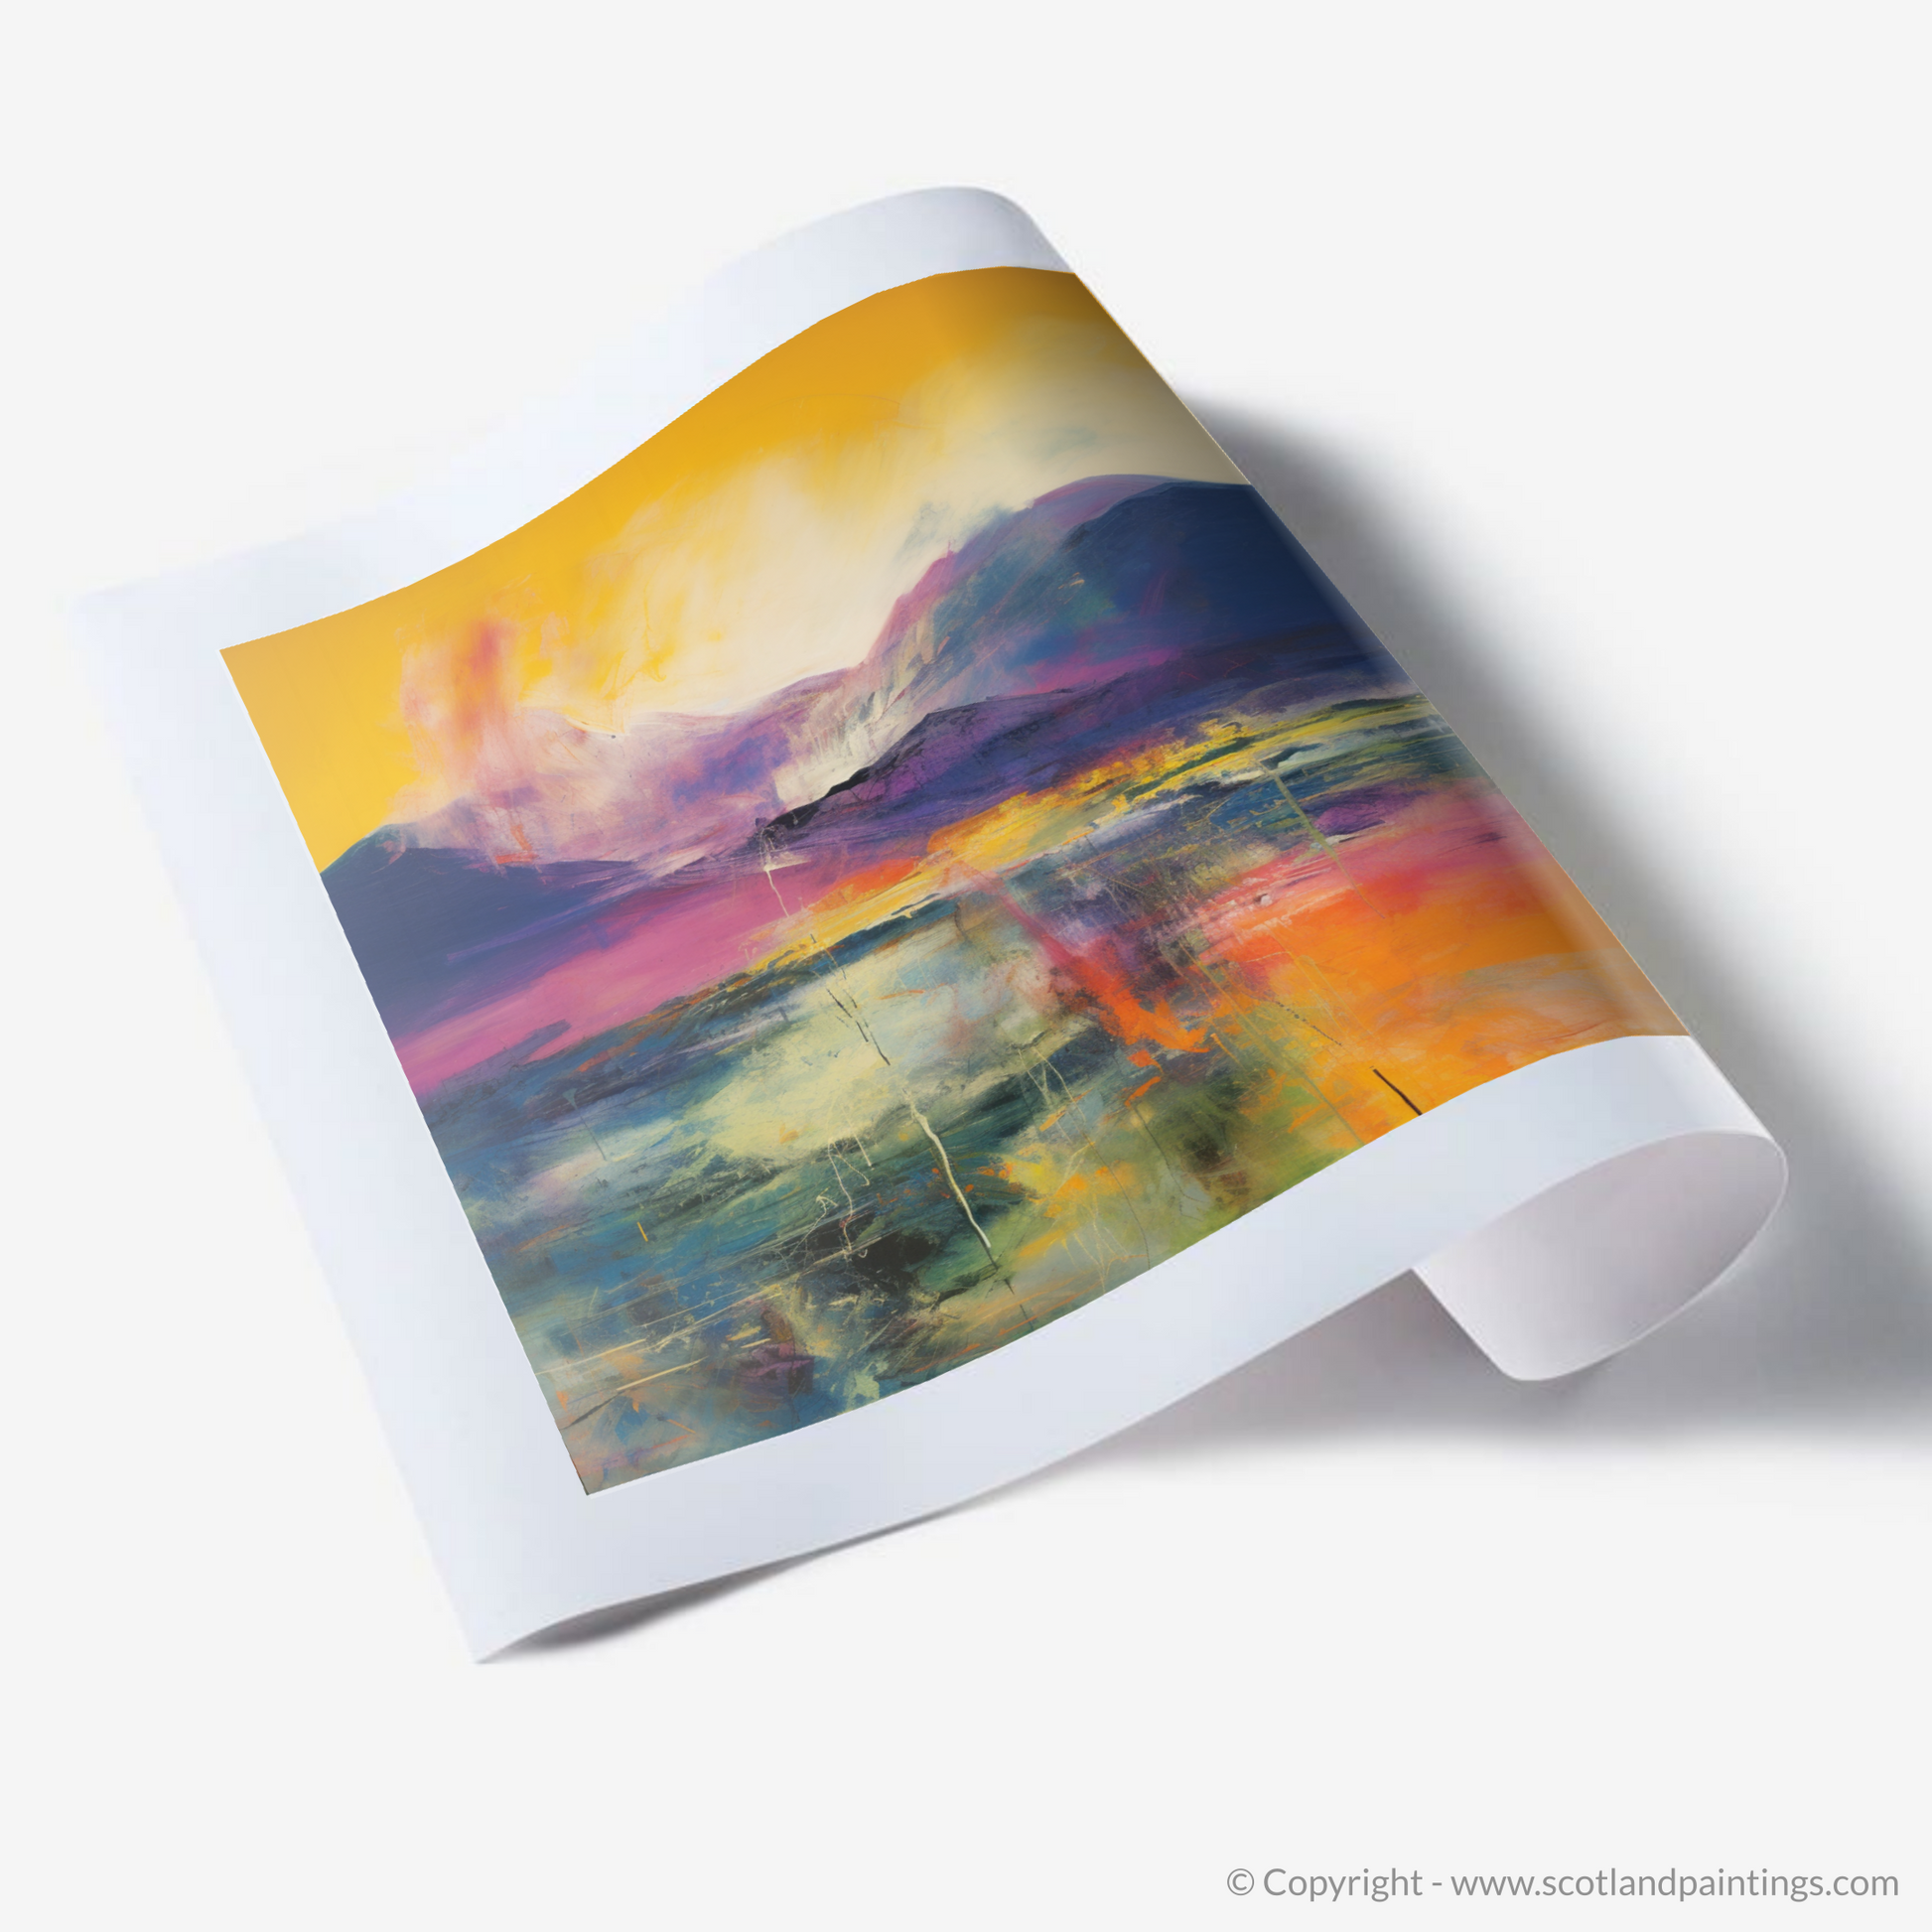 Art Print of Ben Lawers, Perth and Kinross